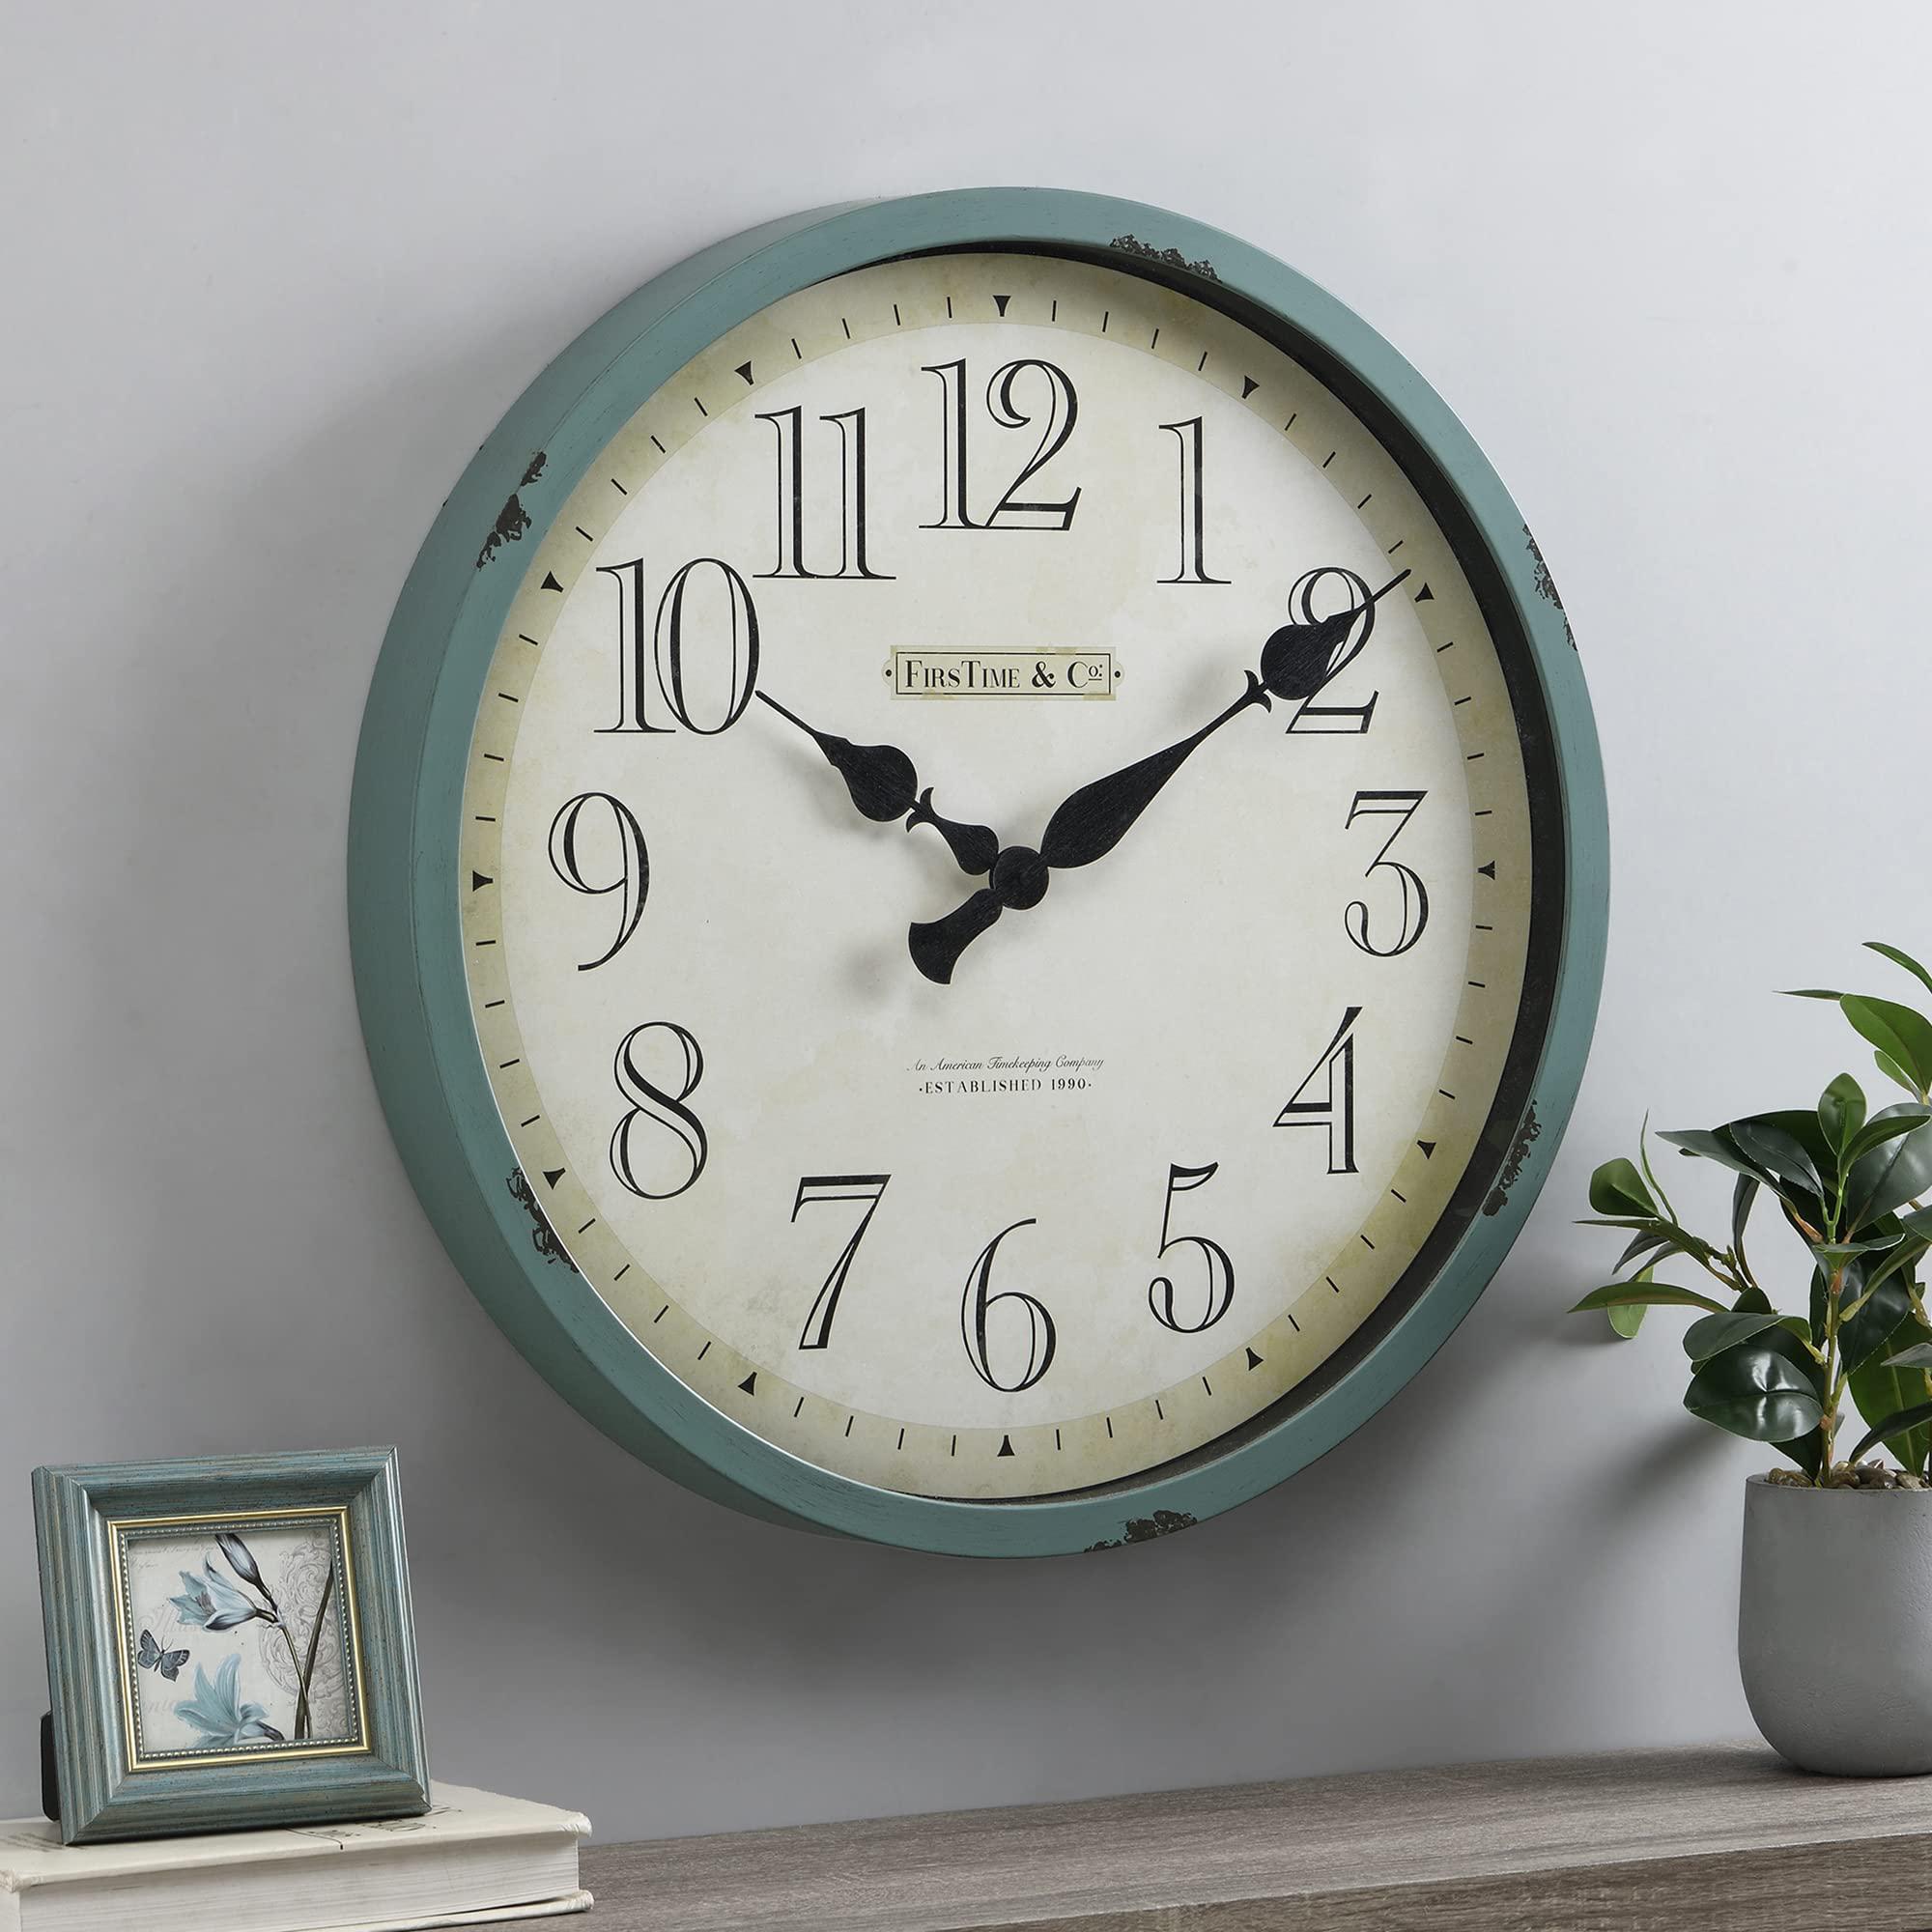 firstime & co. teal bellamy wall clock, large vintage decor for living room, home office, round, plastic, farmhouse, 24 inche